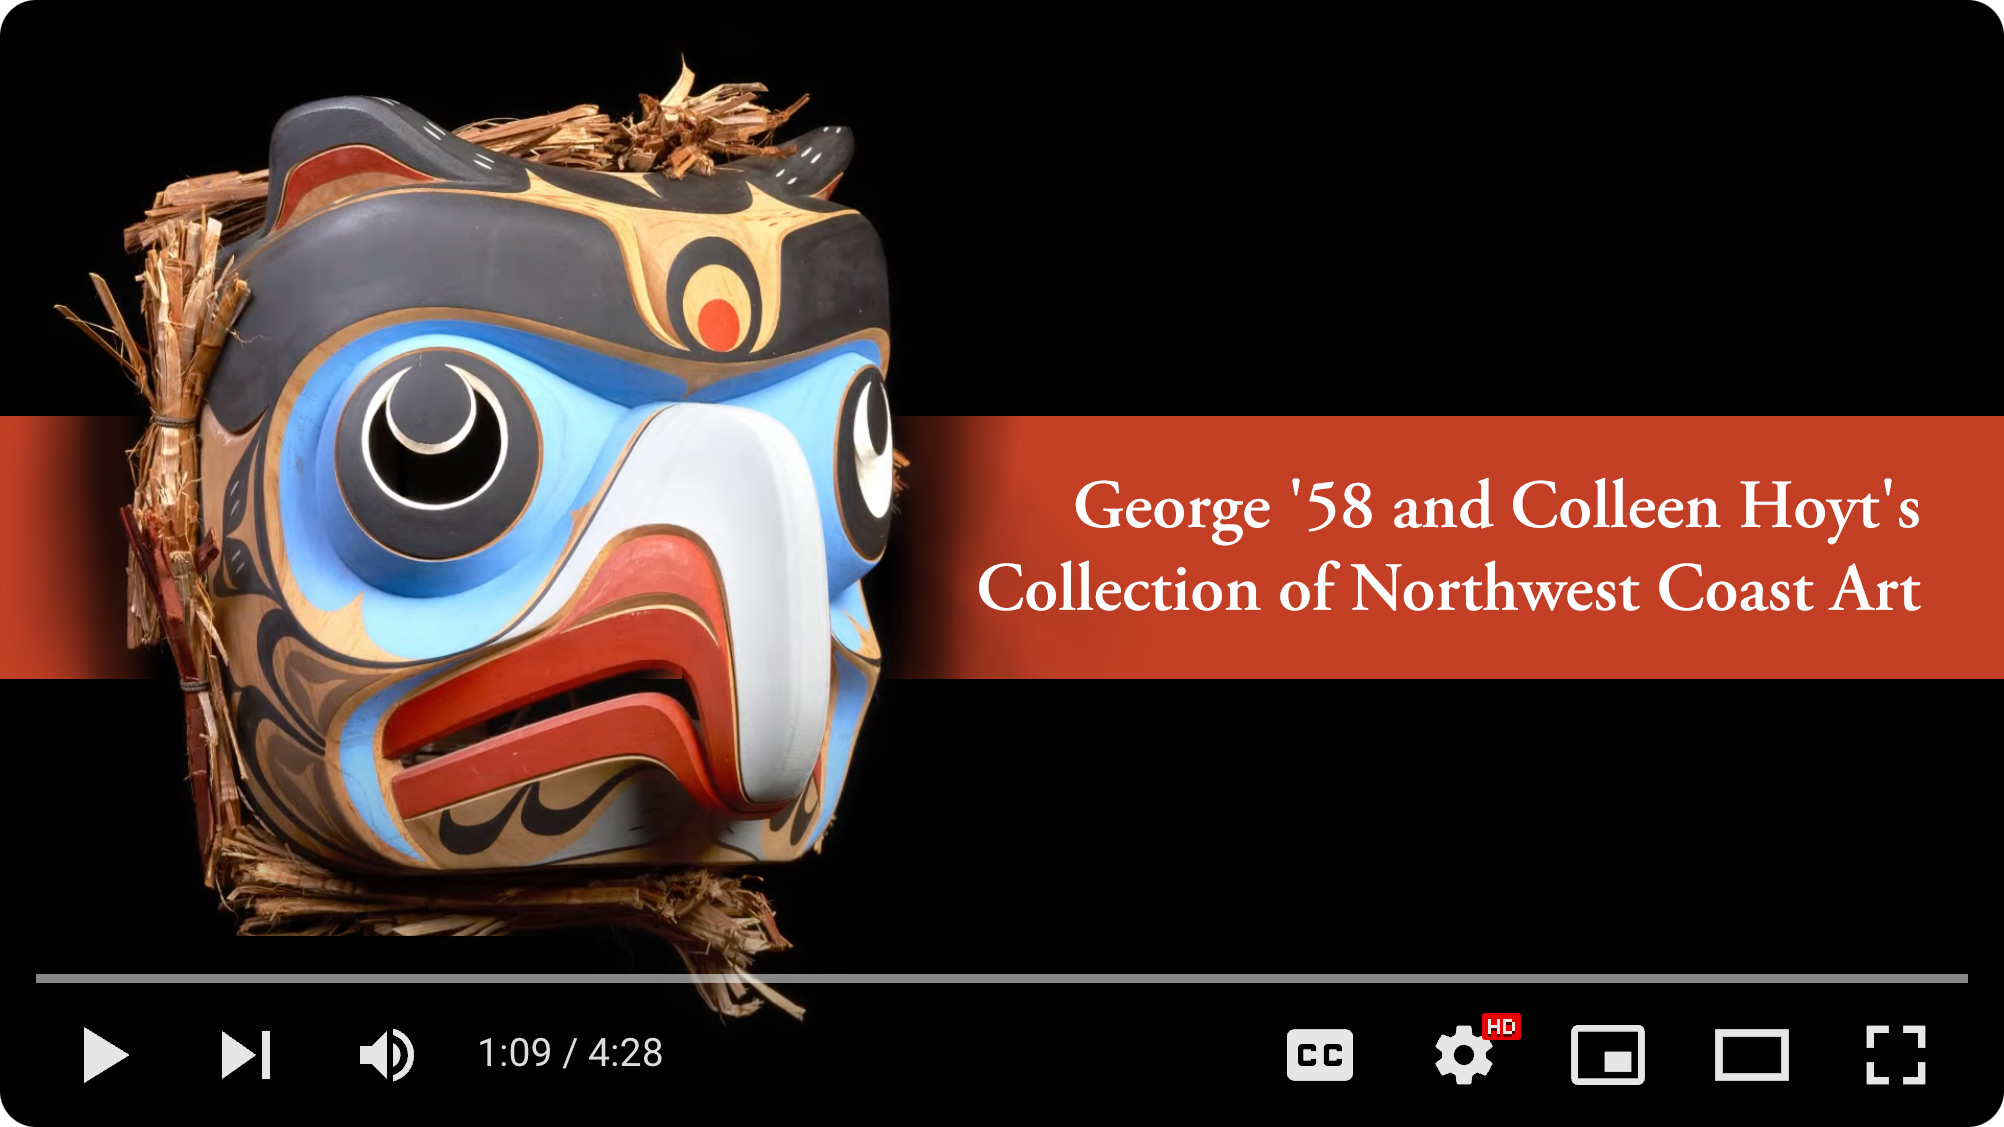 VIDEO: GEORGE '58 AND COLLEEN HOYT'S COLLECTION OF NORTHWEST COAST ART